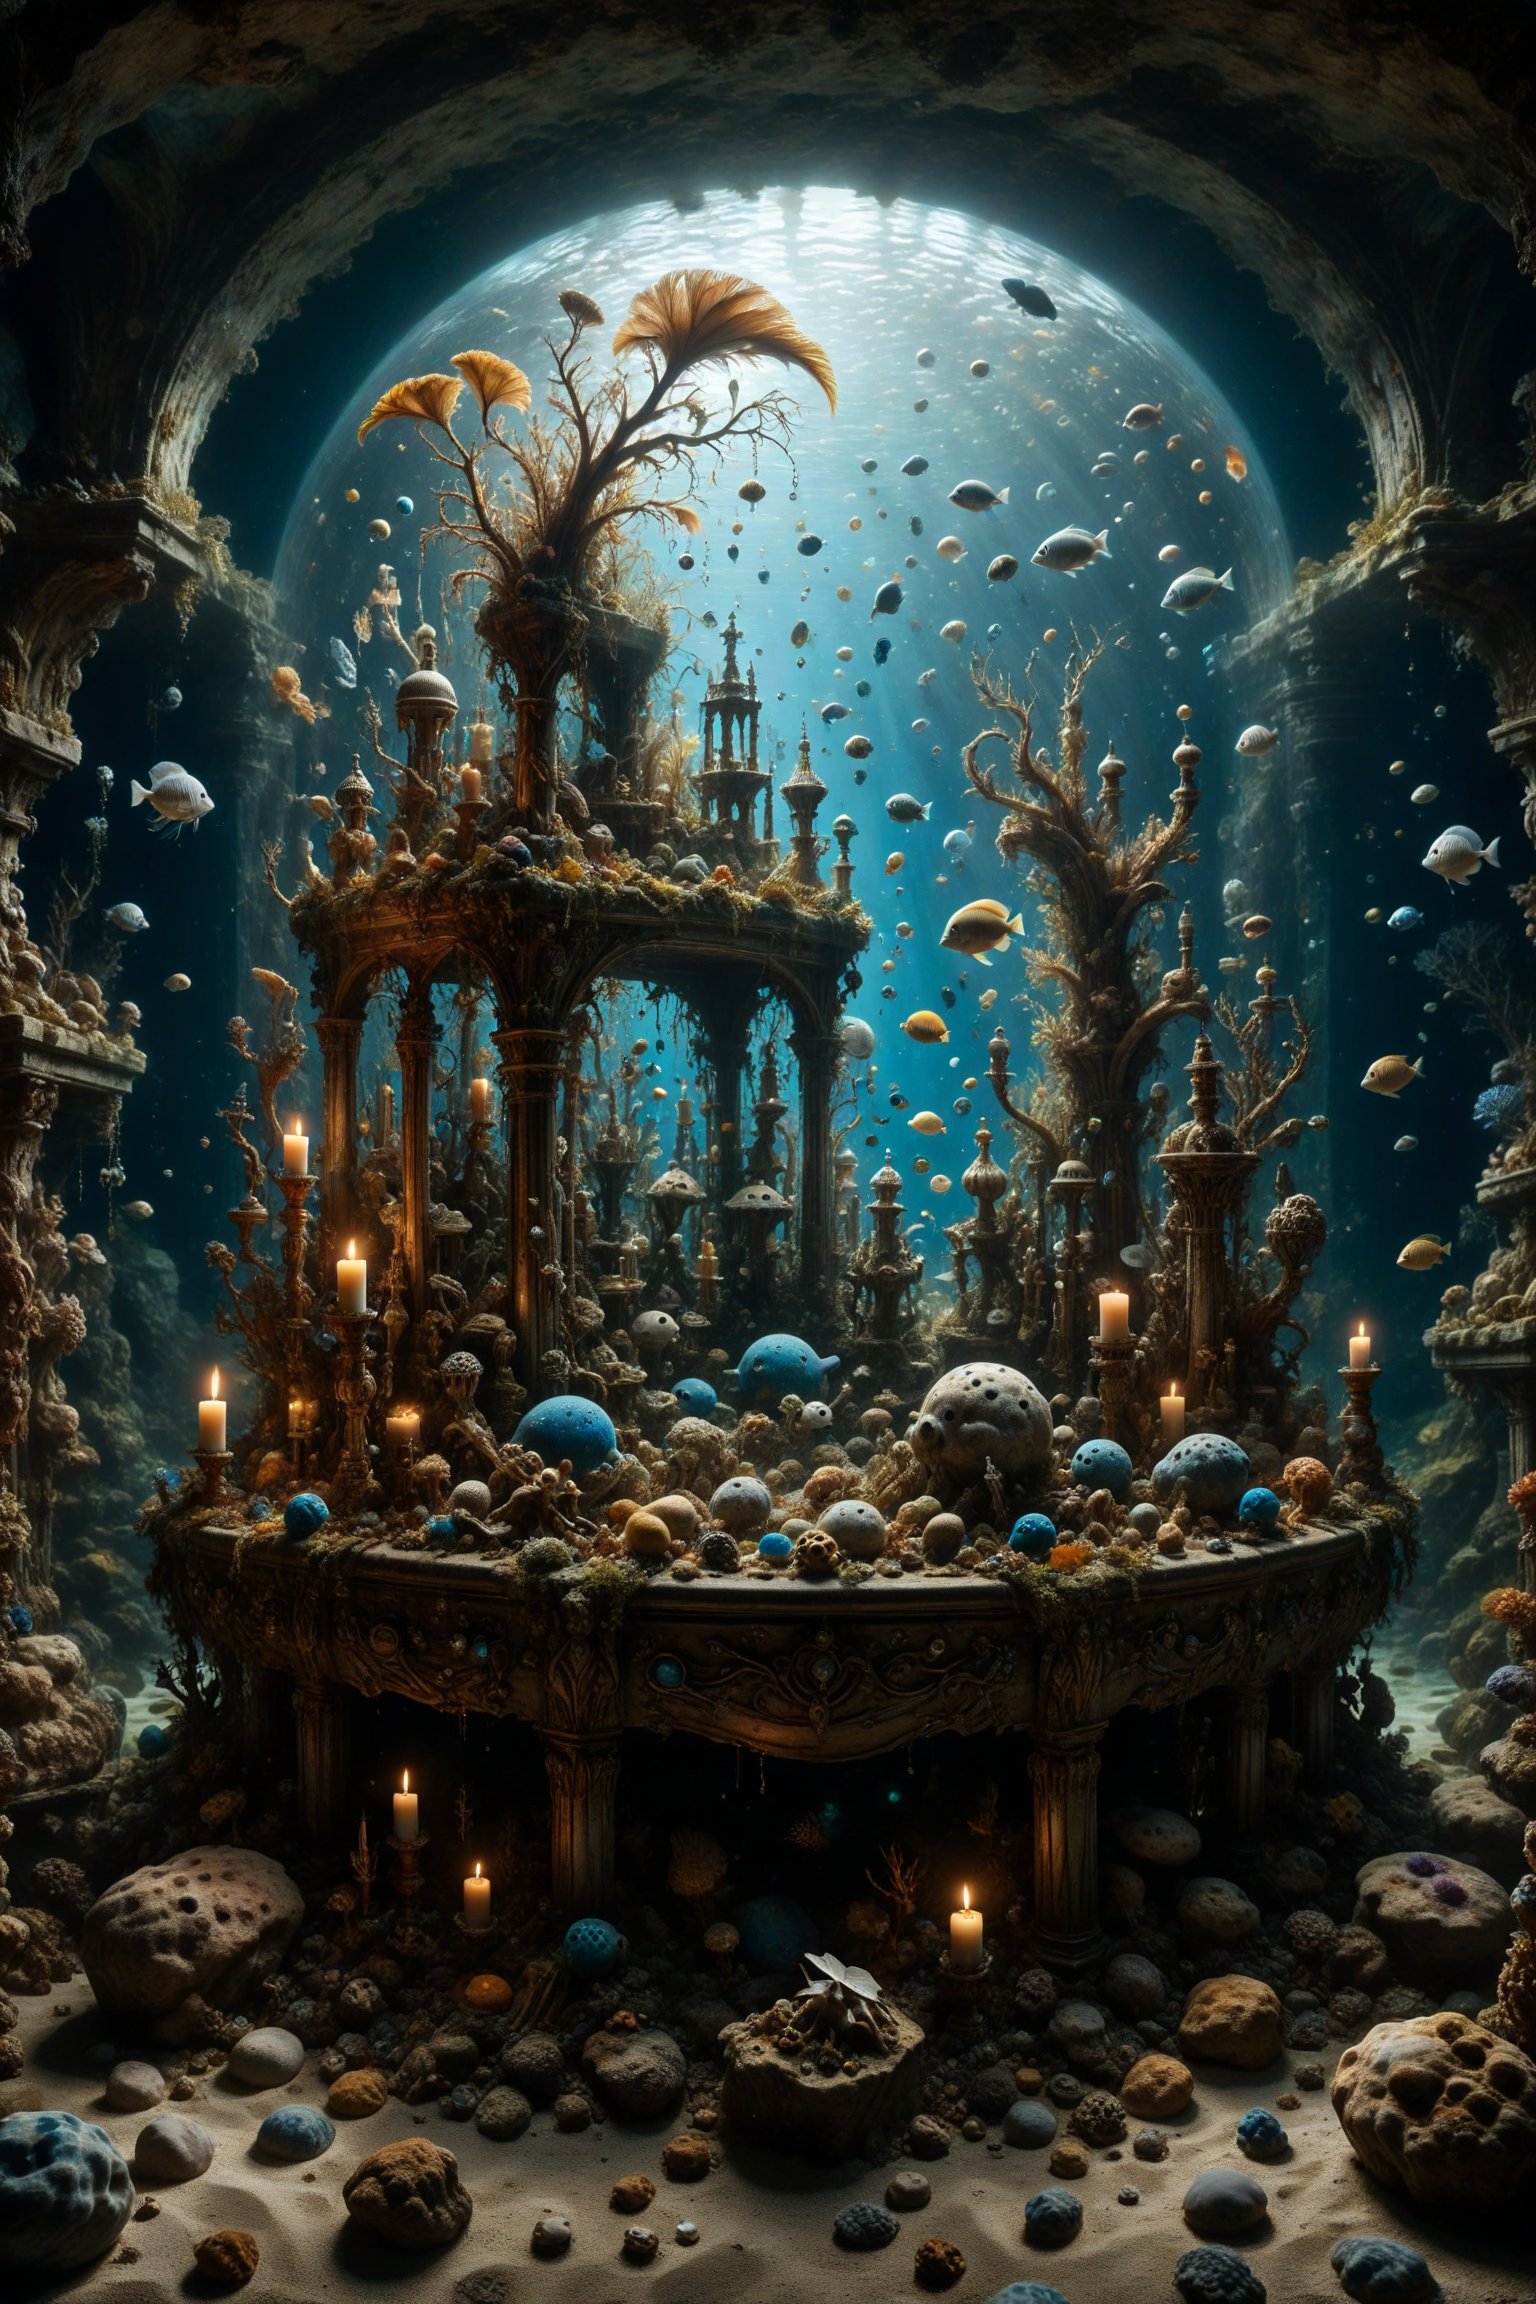 An aquarium with interesting, surreal organic curves, filled with sunken treasures such as chests, jewels, and remnants of ancient ships, with candelabras resembling guardians of the seabed. Inlaid sunken treasures, decorative gold accents, feathers, diamonds, and iridescent bubbles.